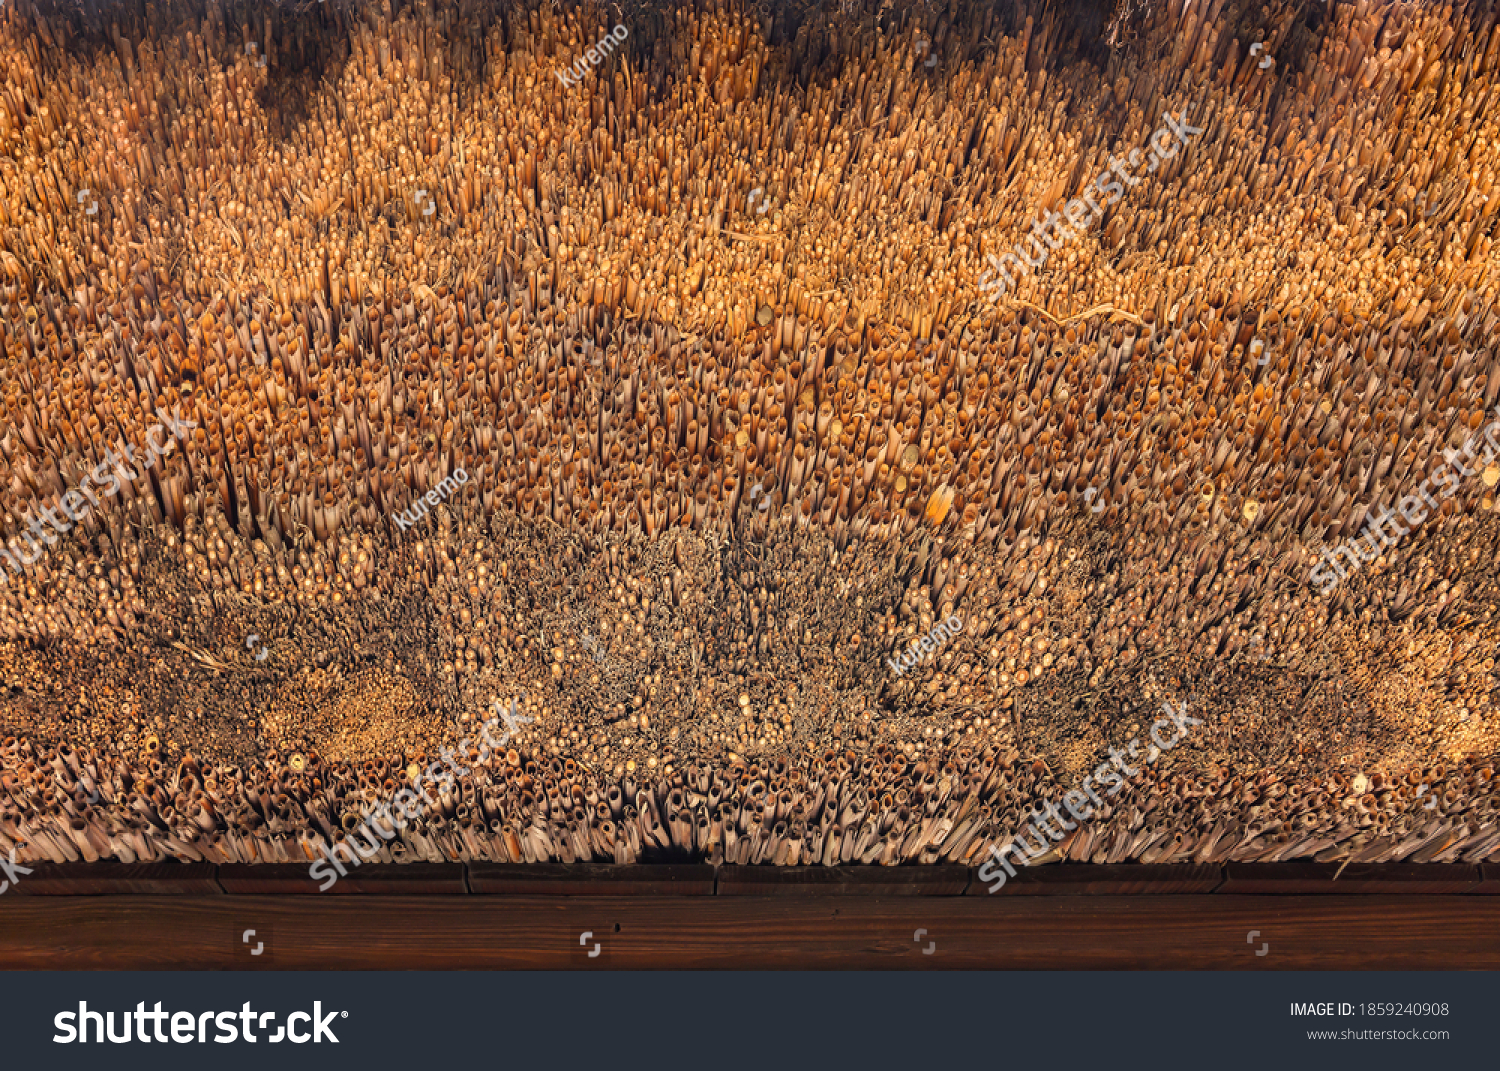 Close-up on the texture of an old Japanese traditional roofing method of thatching named Kayabuki thatched roof using densely packed bulk of dry straw as thick layering in the Buddhist Tamonji temple. #1859240908